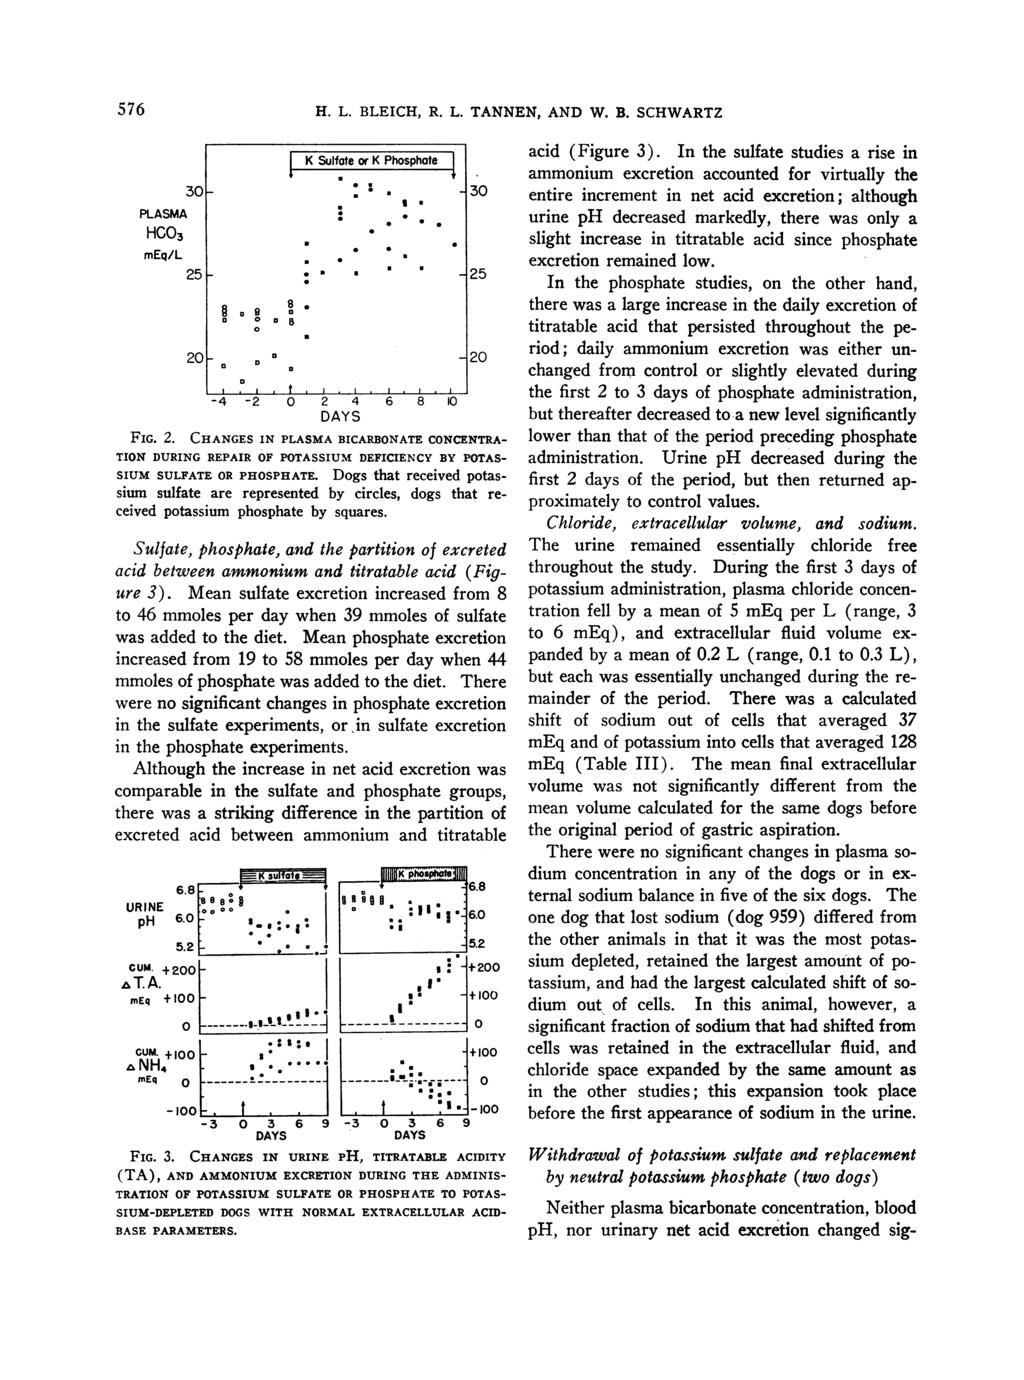 576 H. L. BLEICH, R. L. TANNEN, AND W. B. SCHWARTZ 3 PLASMA HCO3 meq/l 25 2-4 -2 2 4 6 8 1 FIG. 2. CHANGES IN PLASMA BICARBONATE CONCENTRA- TION DURING REPAIR OF POTASSIUM DEFICIENCY BY POTAS- SIUM SULFATE OR PHOSPHATE.